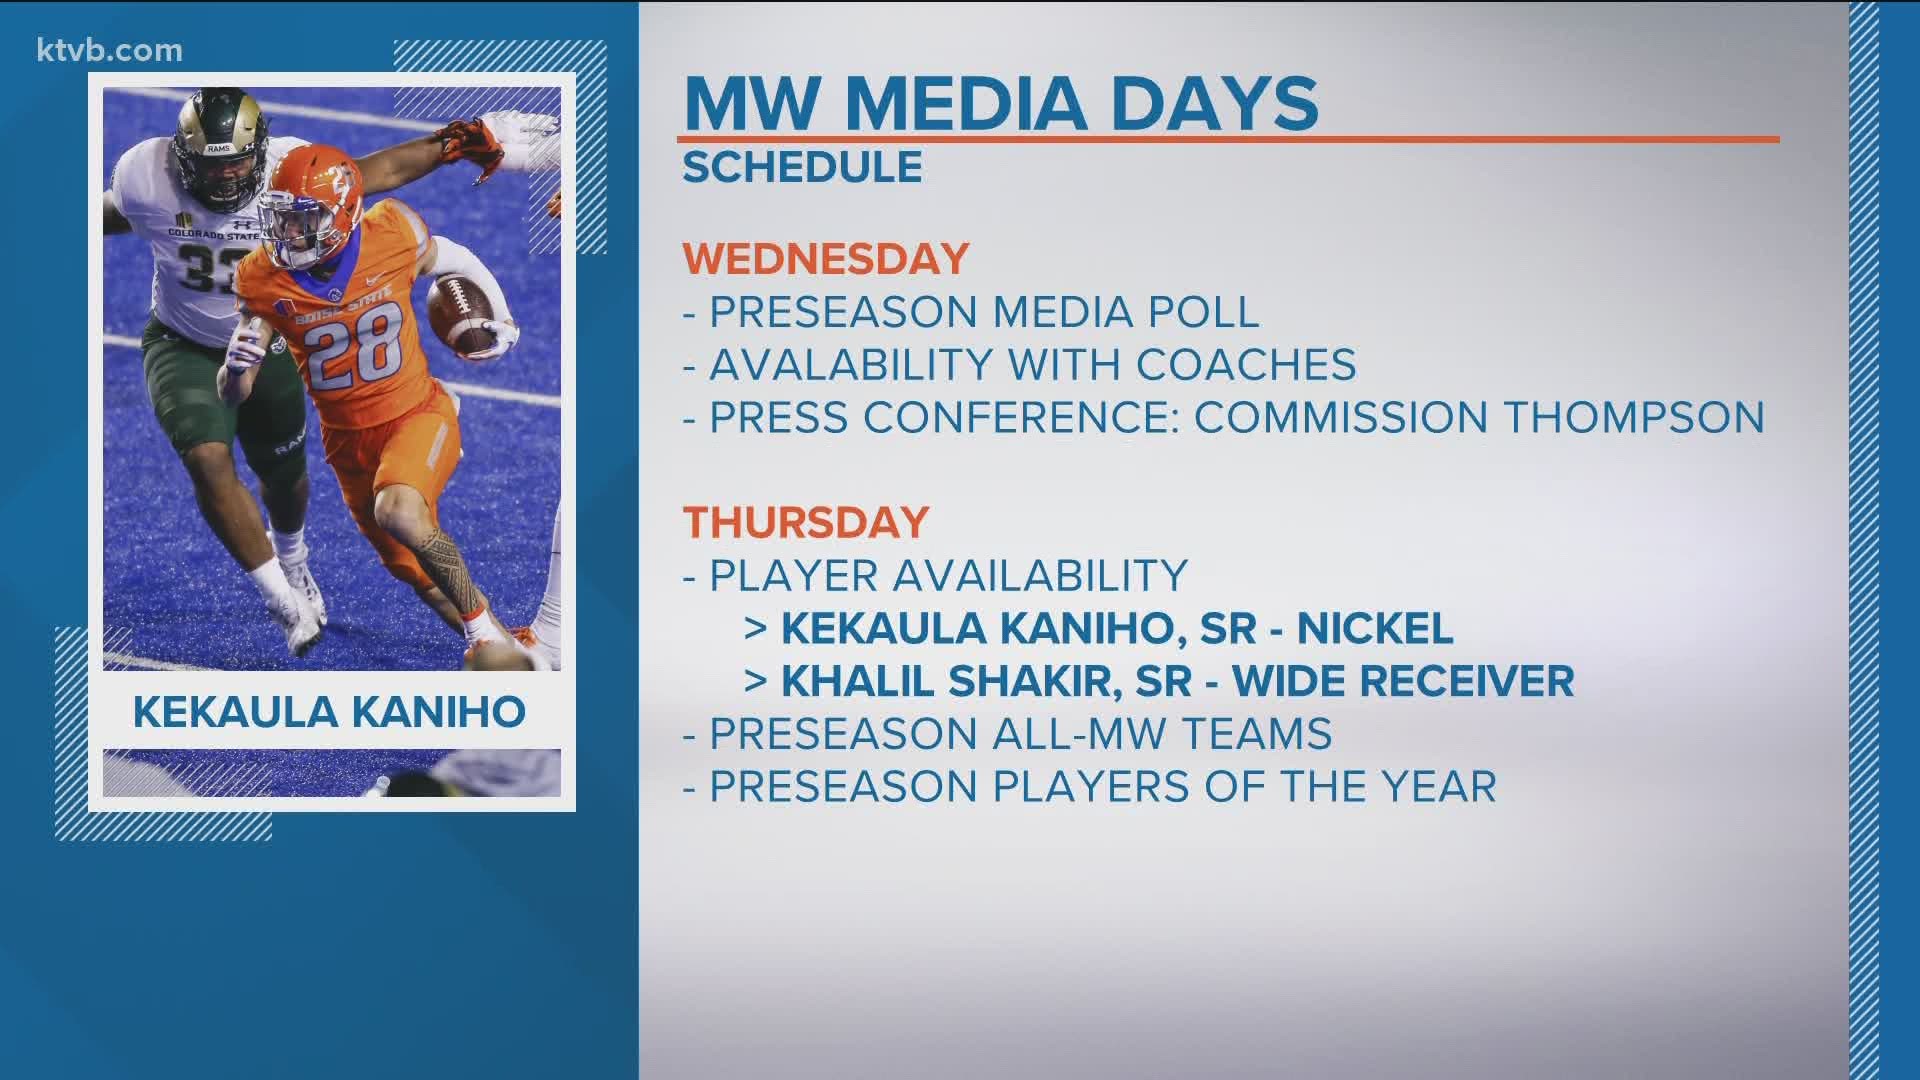 The KTVB sports duo break down everything Bronco Nation should know about the 2021 MWC Media Days.